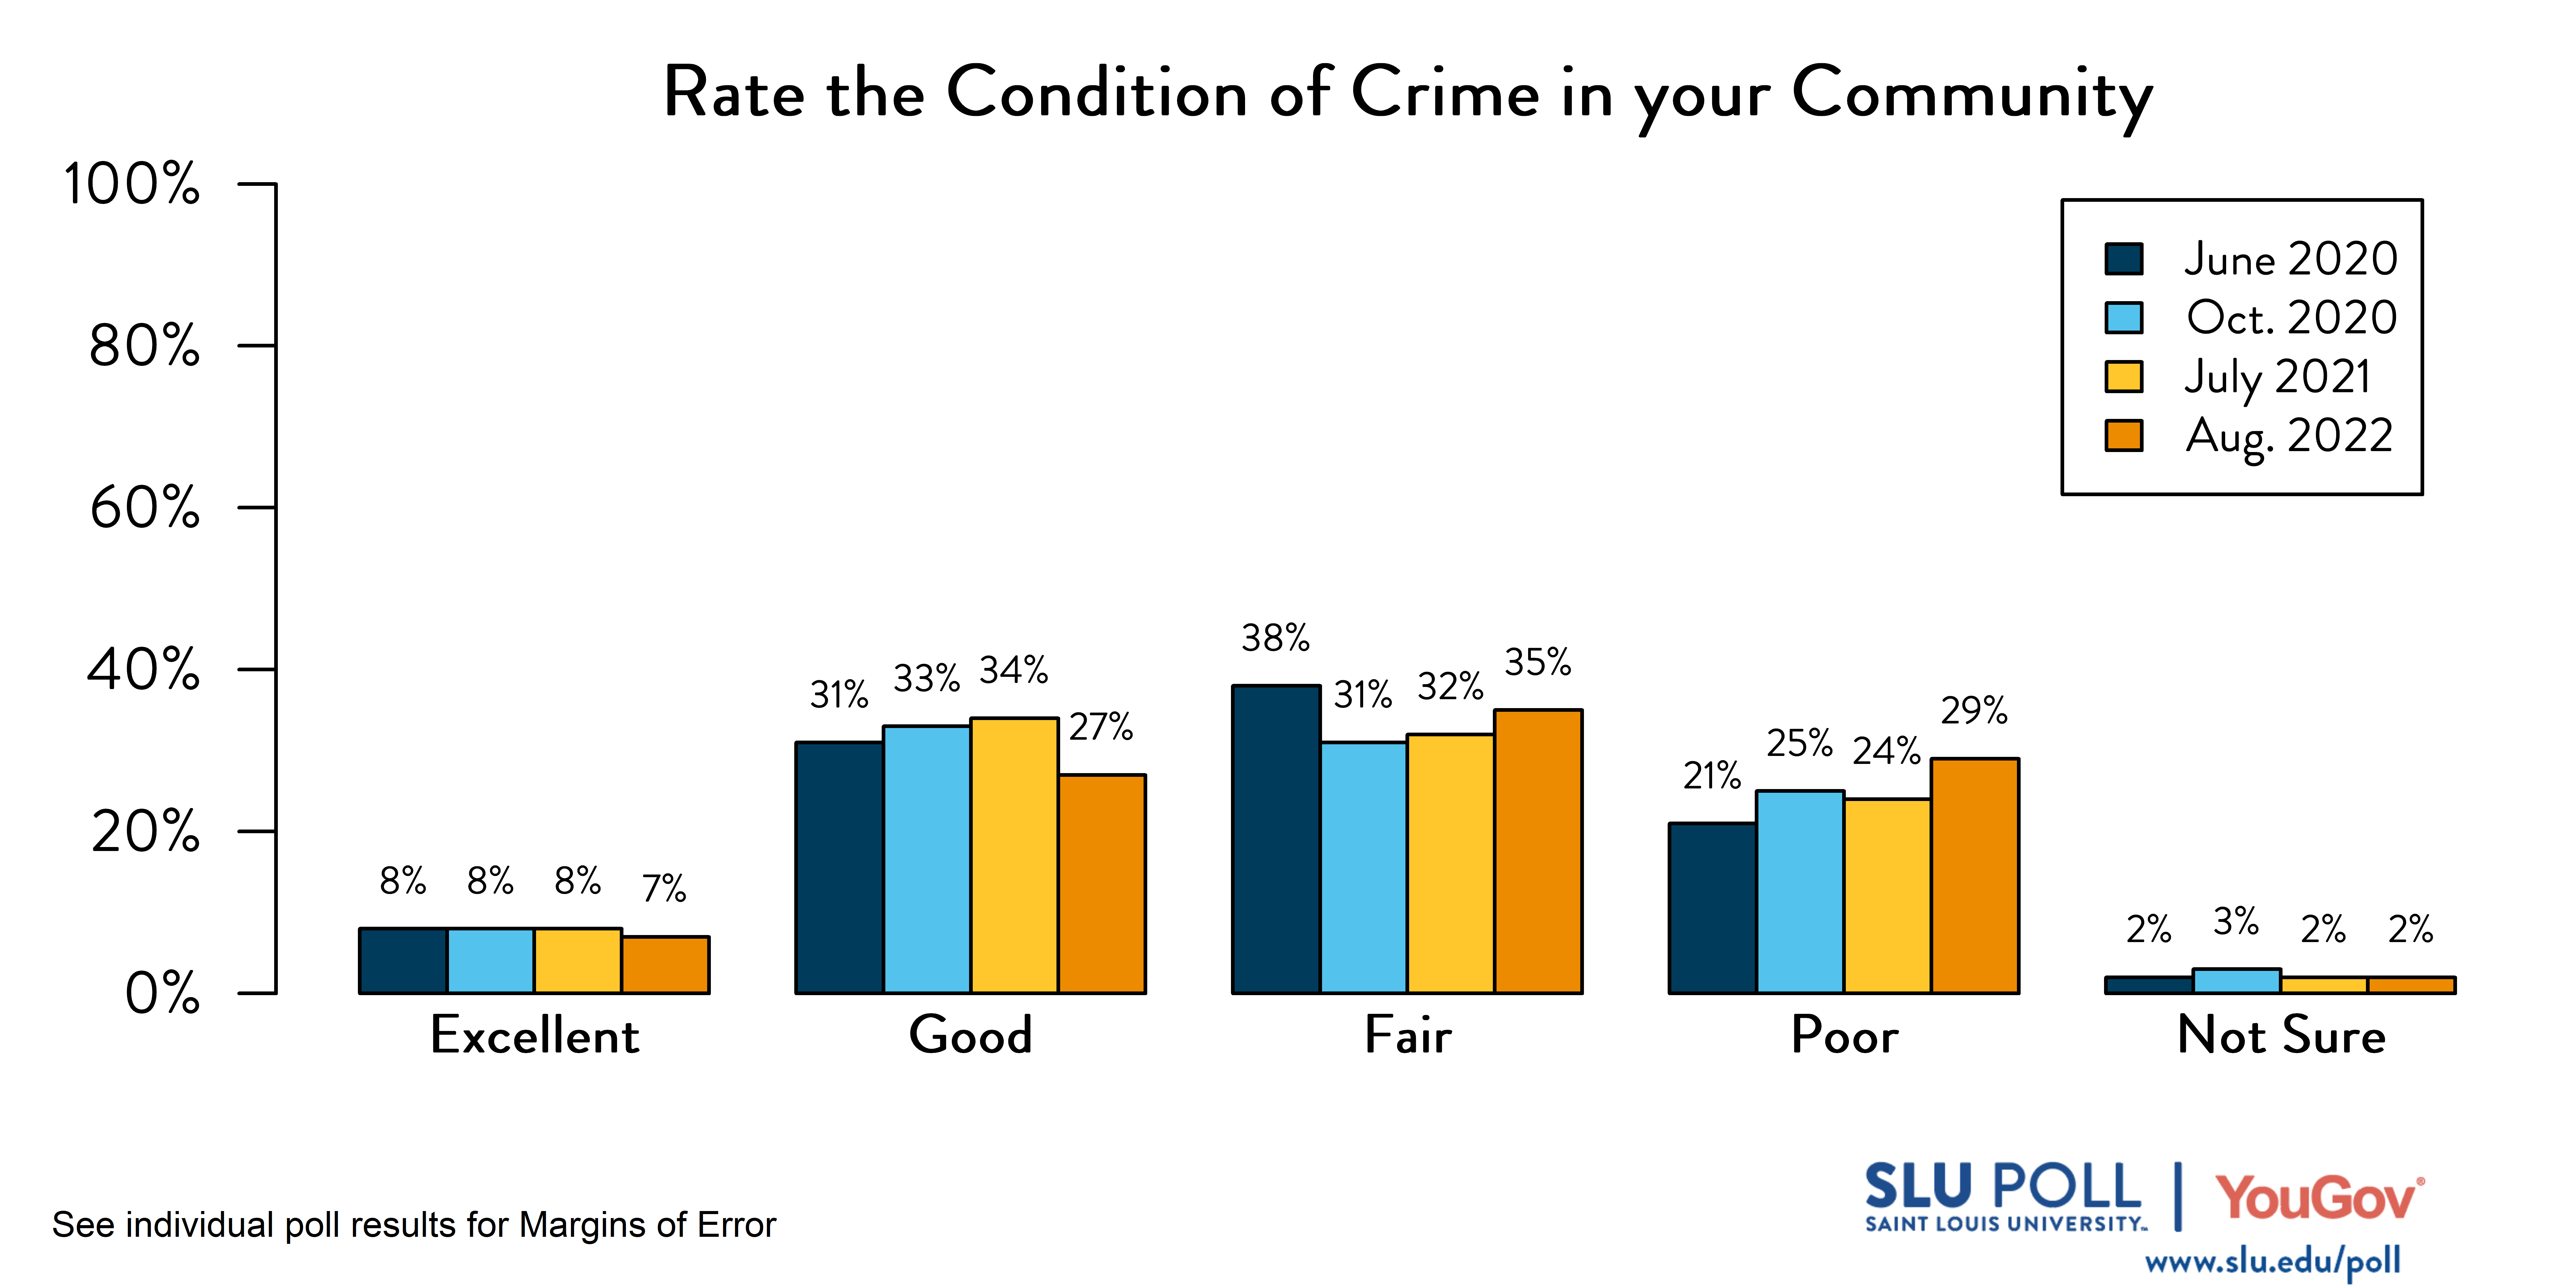 Likely voters' responses to 'How would you rate the following: Crime in your community?'. June 2020 Voter Responses 8% Excellent, 31% Good, 38% Fair, 21% Poor, and 2% Not Sure. October 2020 Voter Responses: 8% Excellent, 33% Good, 31% Fair, 25% Poor, and 3% Not sure. July 2021 Voter Responses: 8% Excellent, 34% Good, 32% Fair, 24% Poor, and 2% Not sure. August 2021 Voter Responses: 7% Excellent, 27% Good, 35% Fair, 29% Poor, and 2% Not sure.